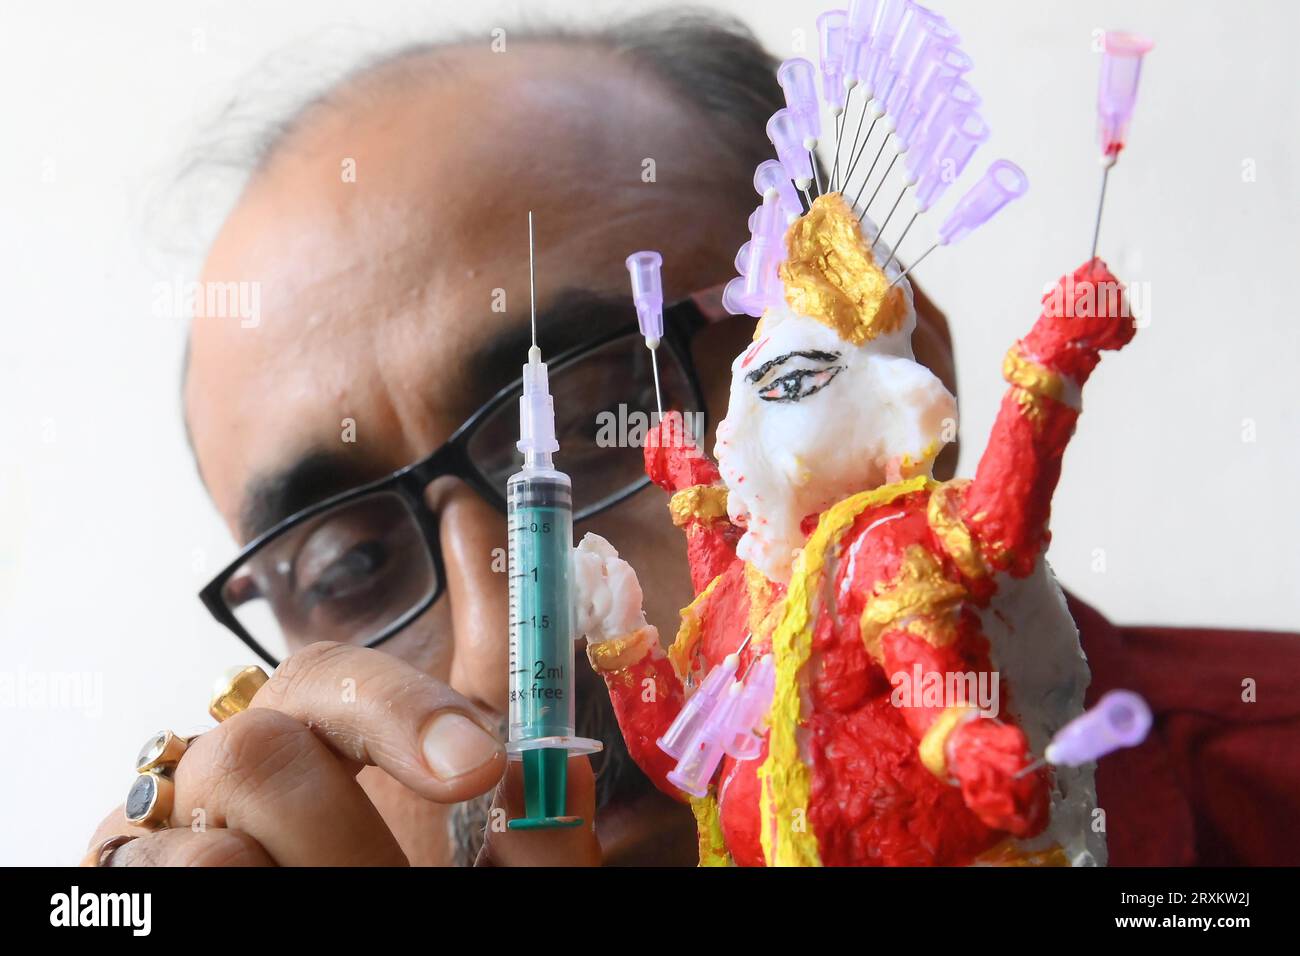 Samiran De, an artist works on an idol of Lord Ganesha made with soup and syringe needles to alert people against drugs, ahead of Ganesh Chaturthi festival, in Agartala. Tripura, India. Stock Photo